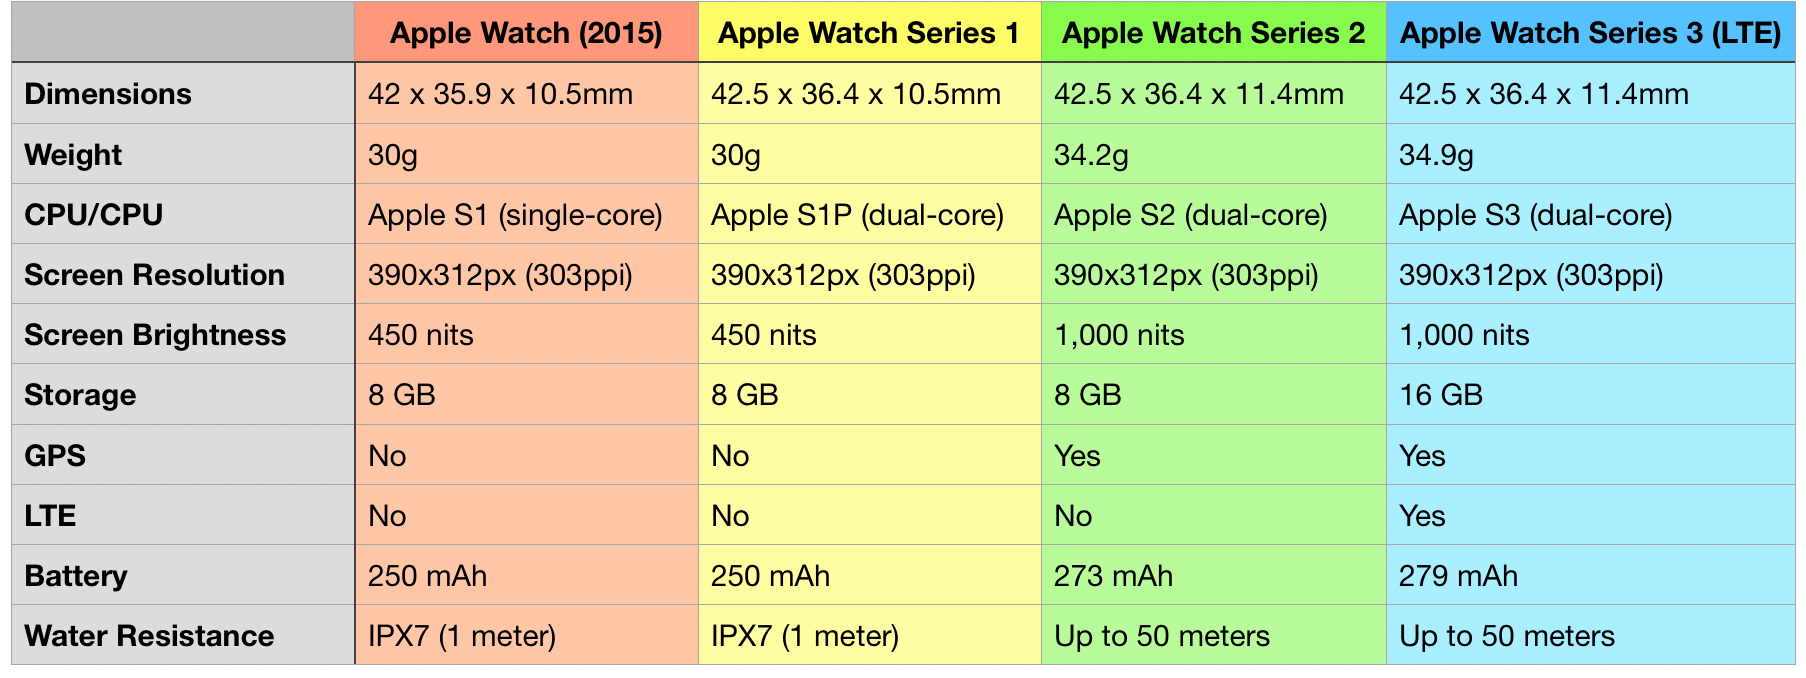 Apple Watch Series 3  Features, Specs, Prices